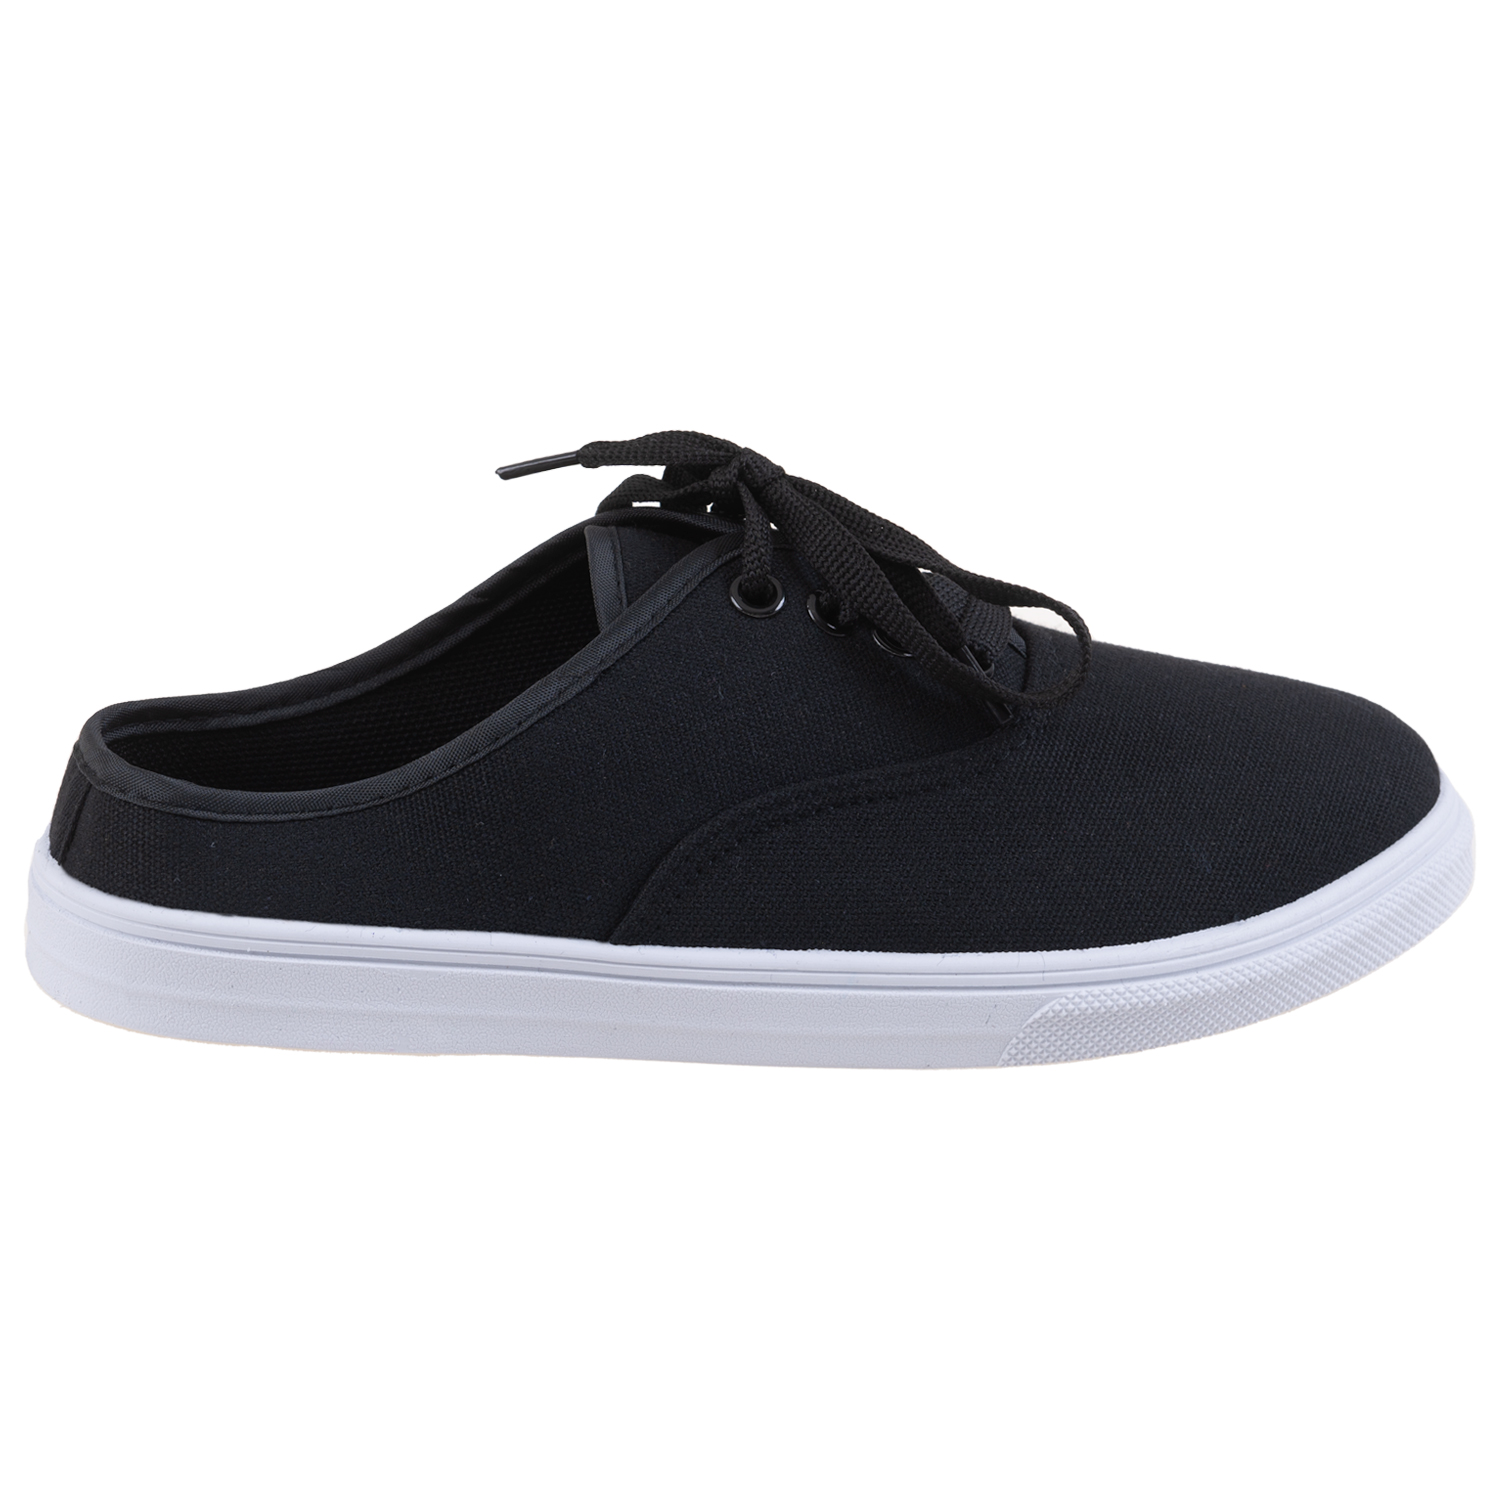 Lace-up canvas mule sneakers - Black, size 6